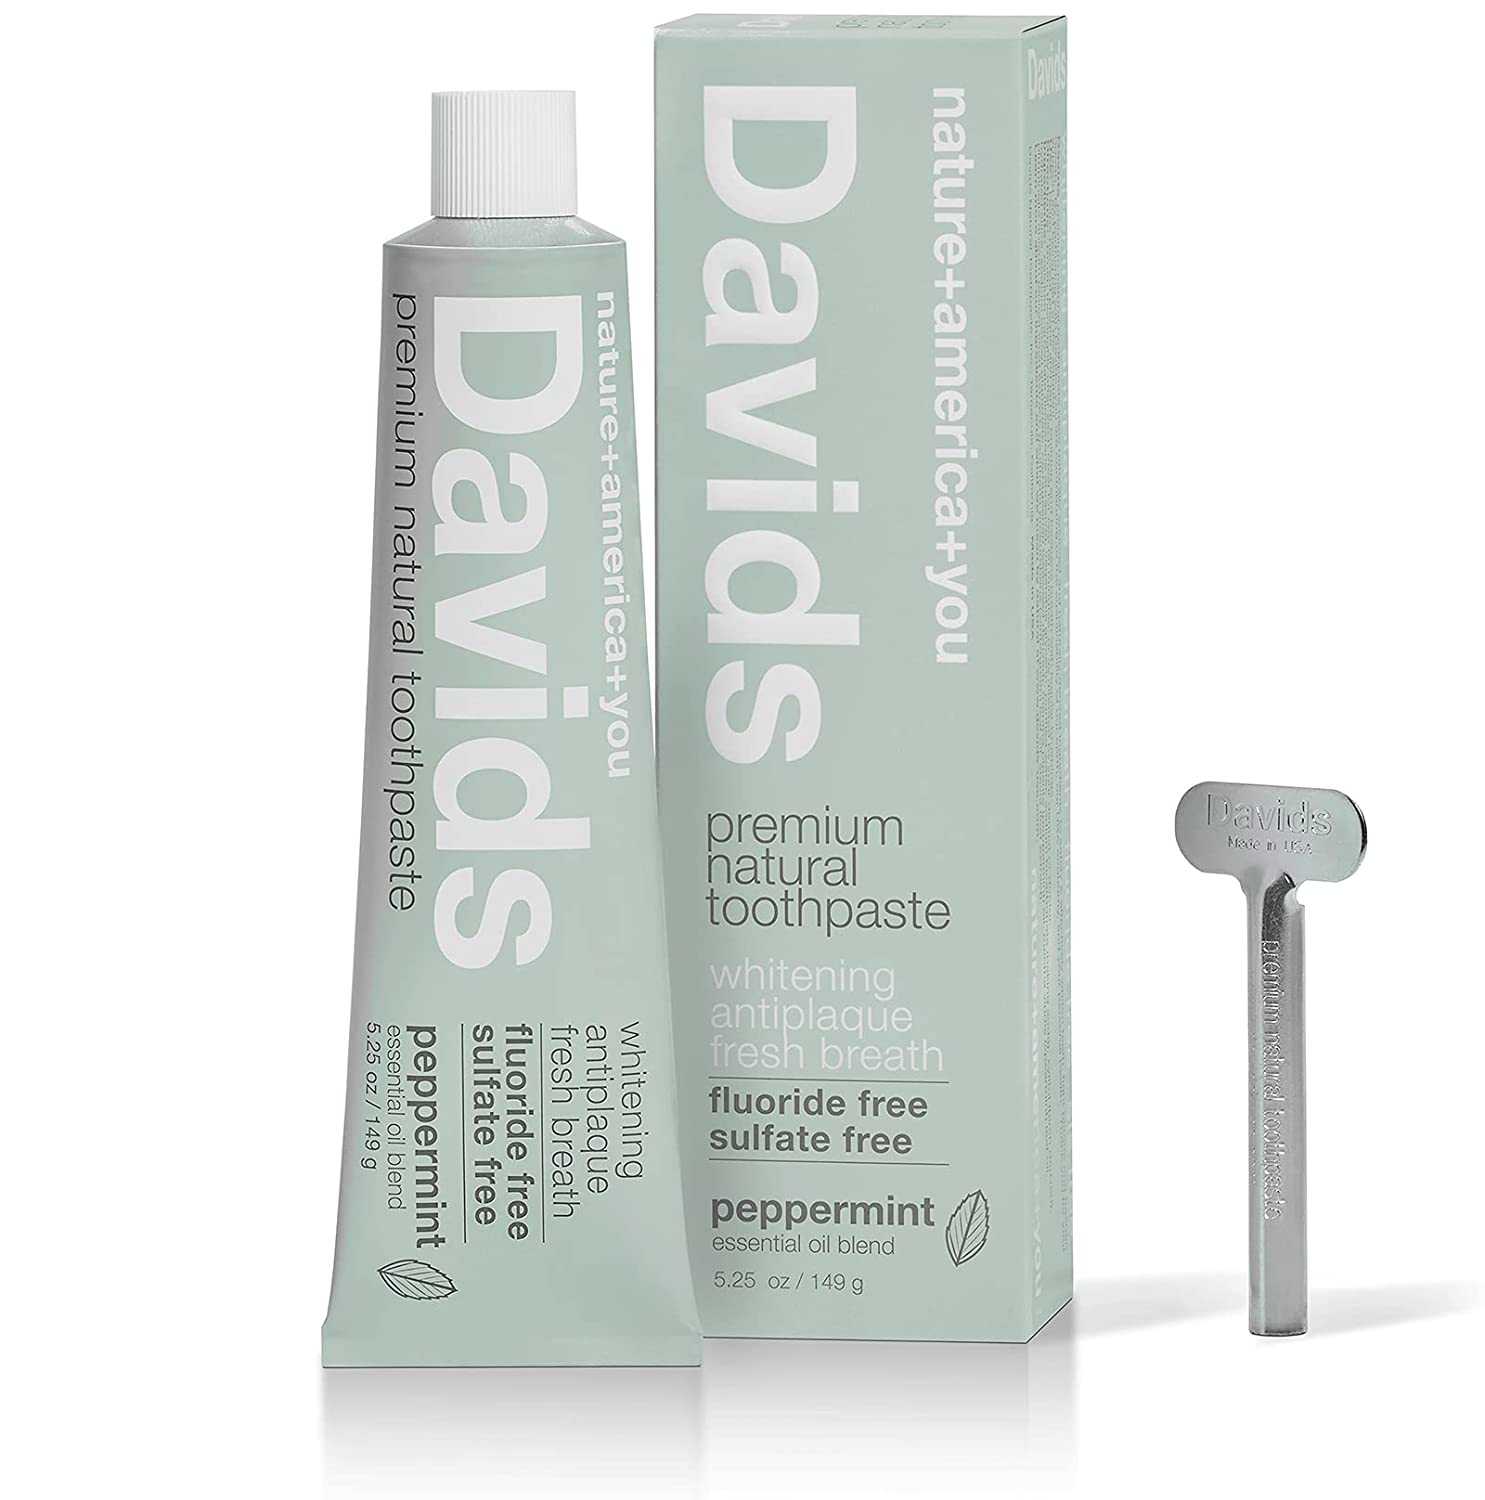 David's natural toothpaste